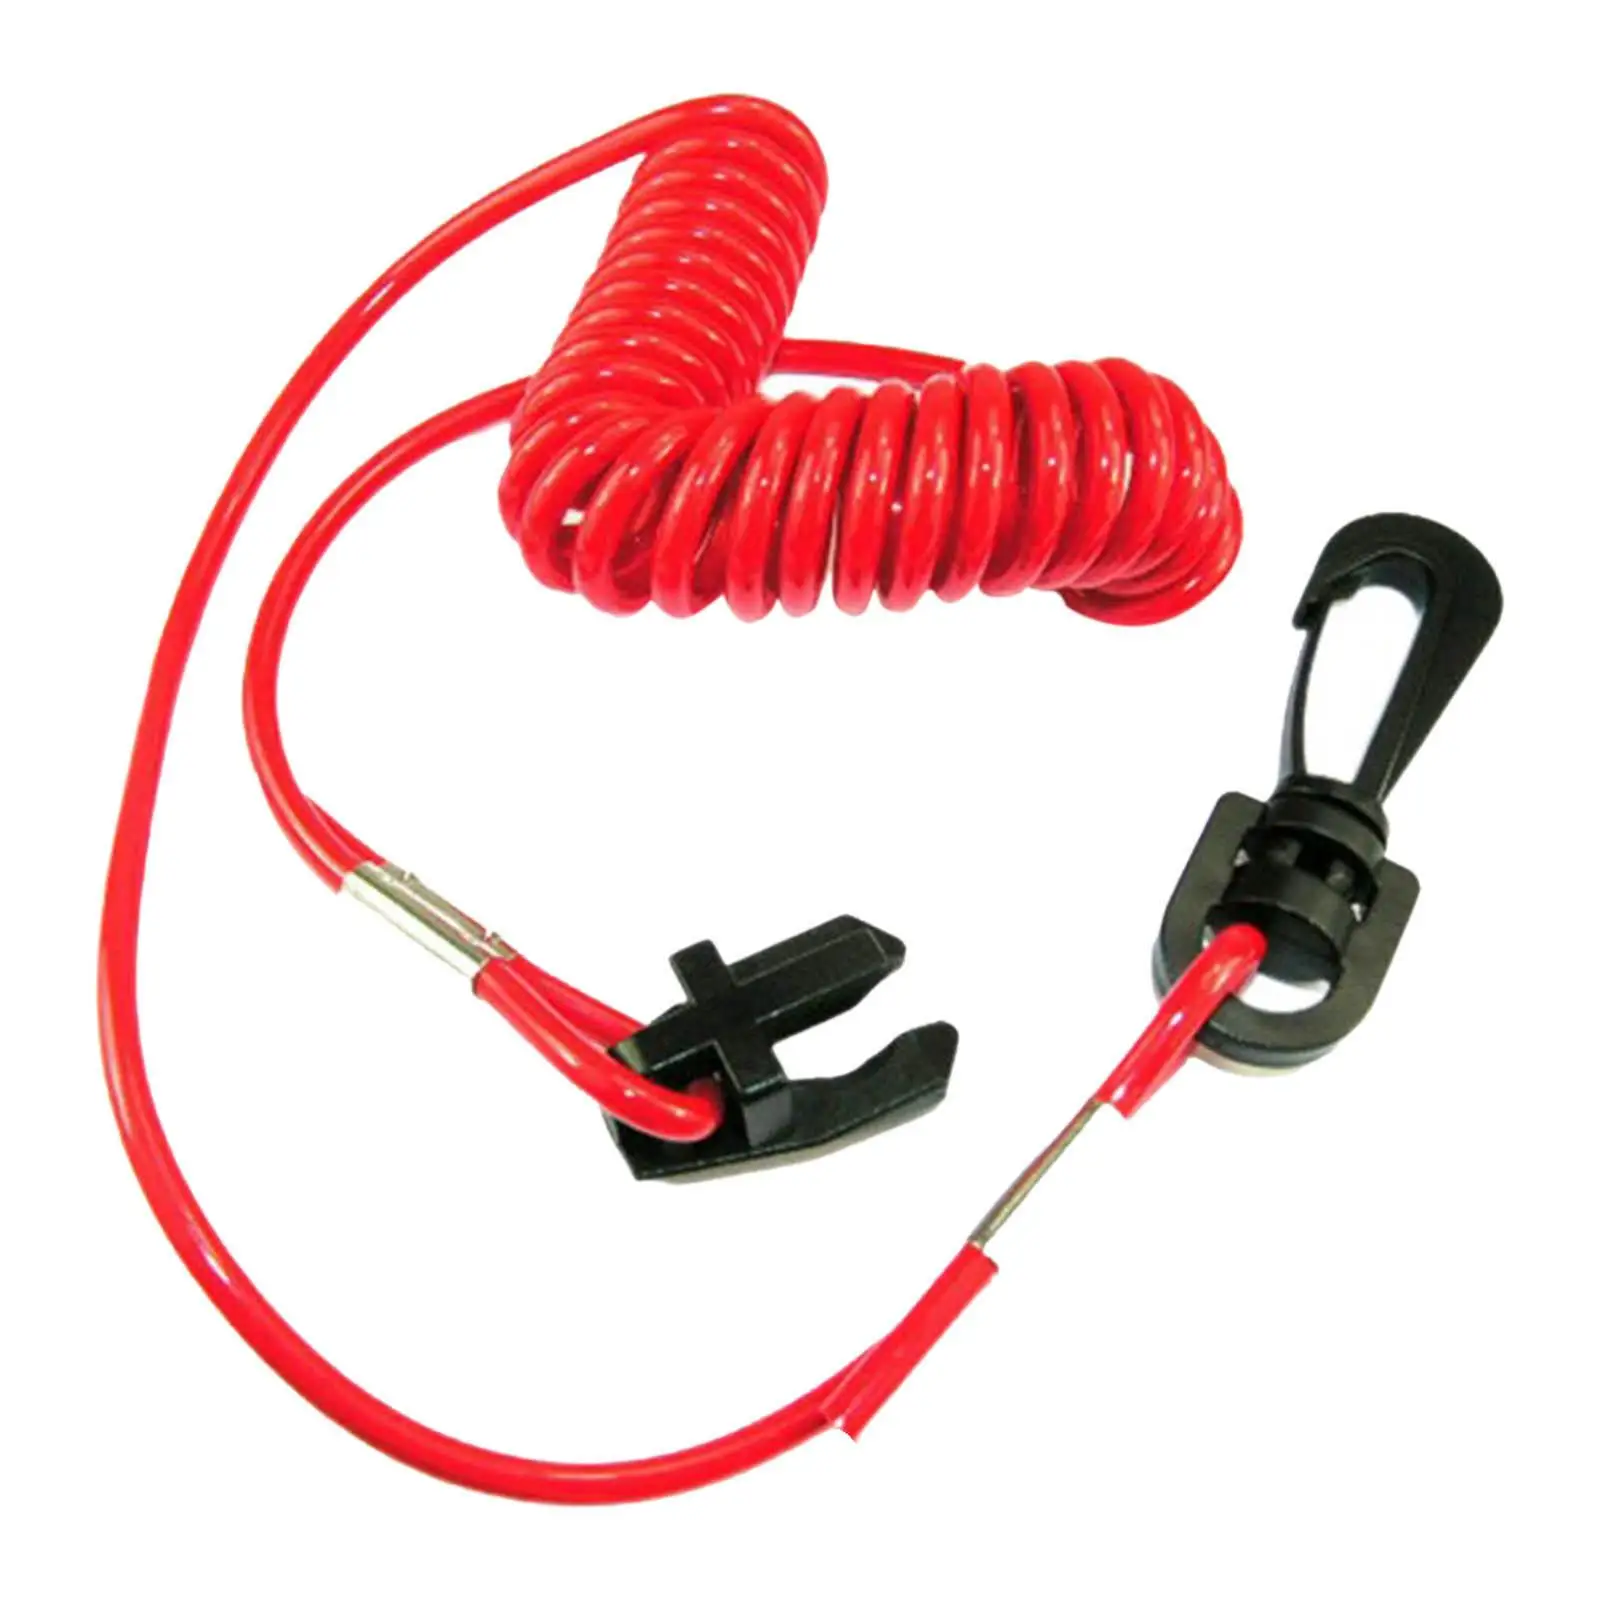 Boat Safety Kill Stop Switch Lanyard, Stop Switch Marine Safety Tether Cord Fit